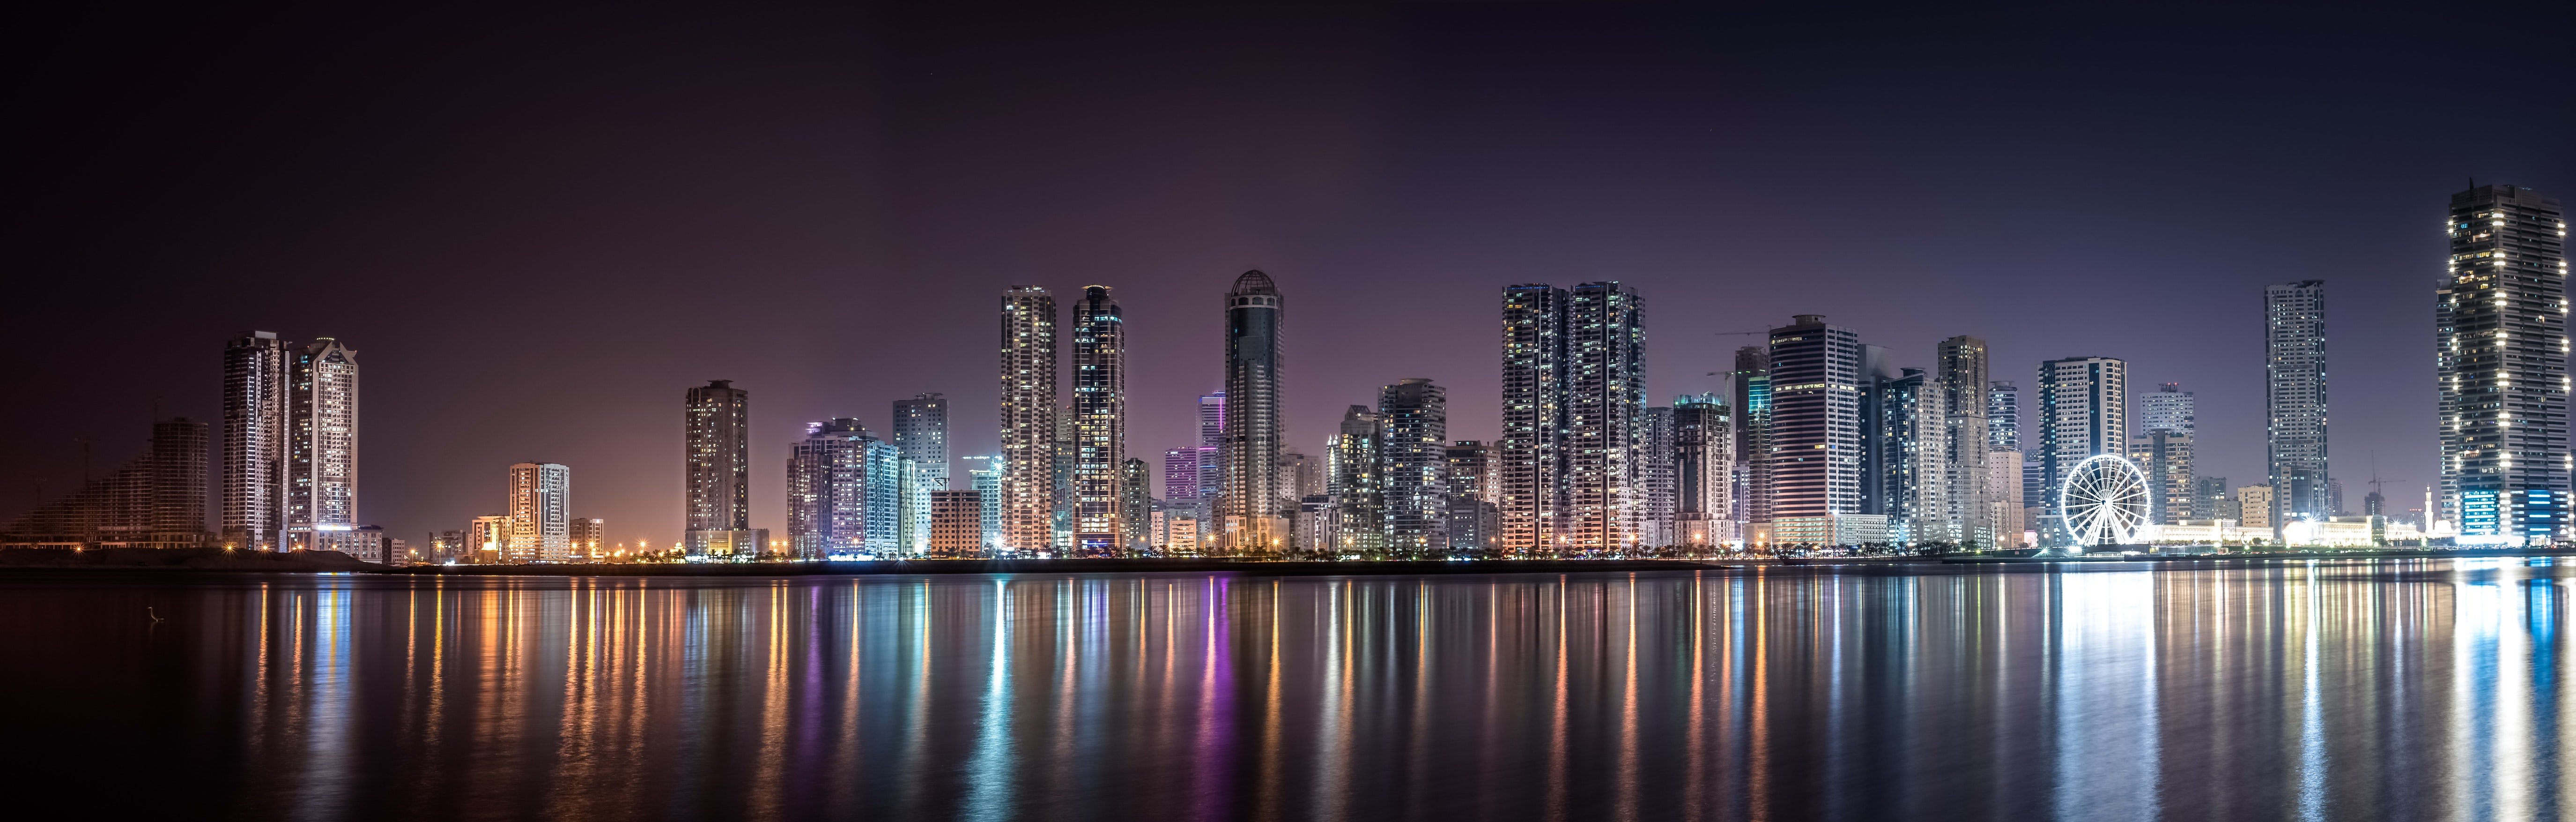 Panoramic View of City Lit Up at Night · Free